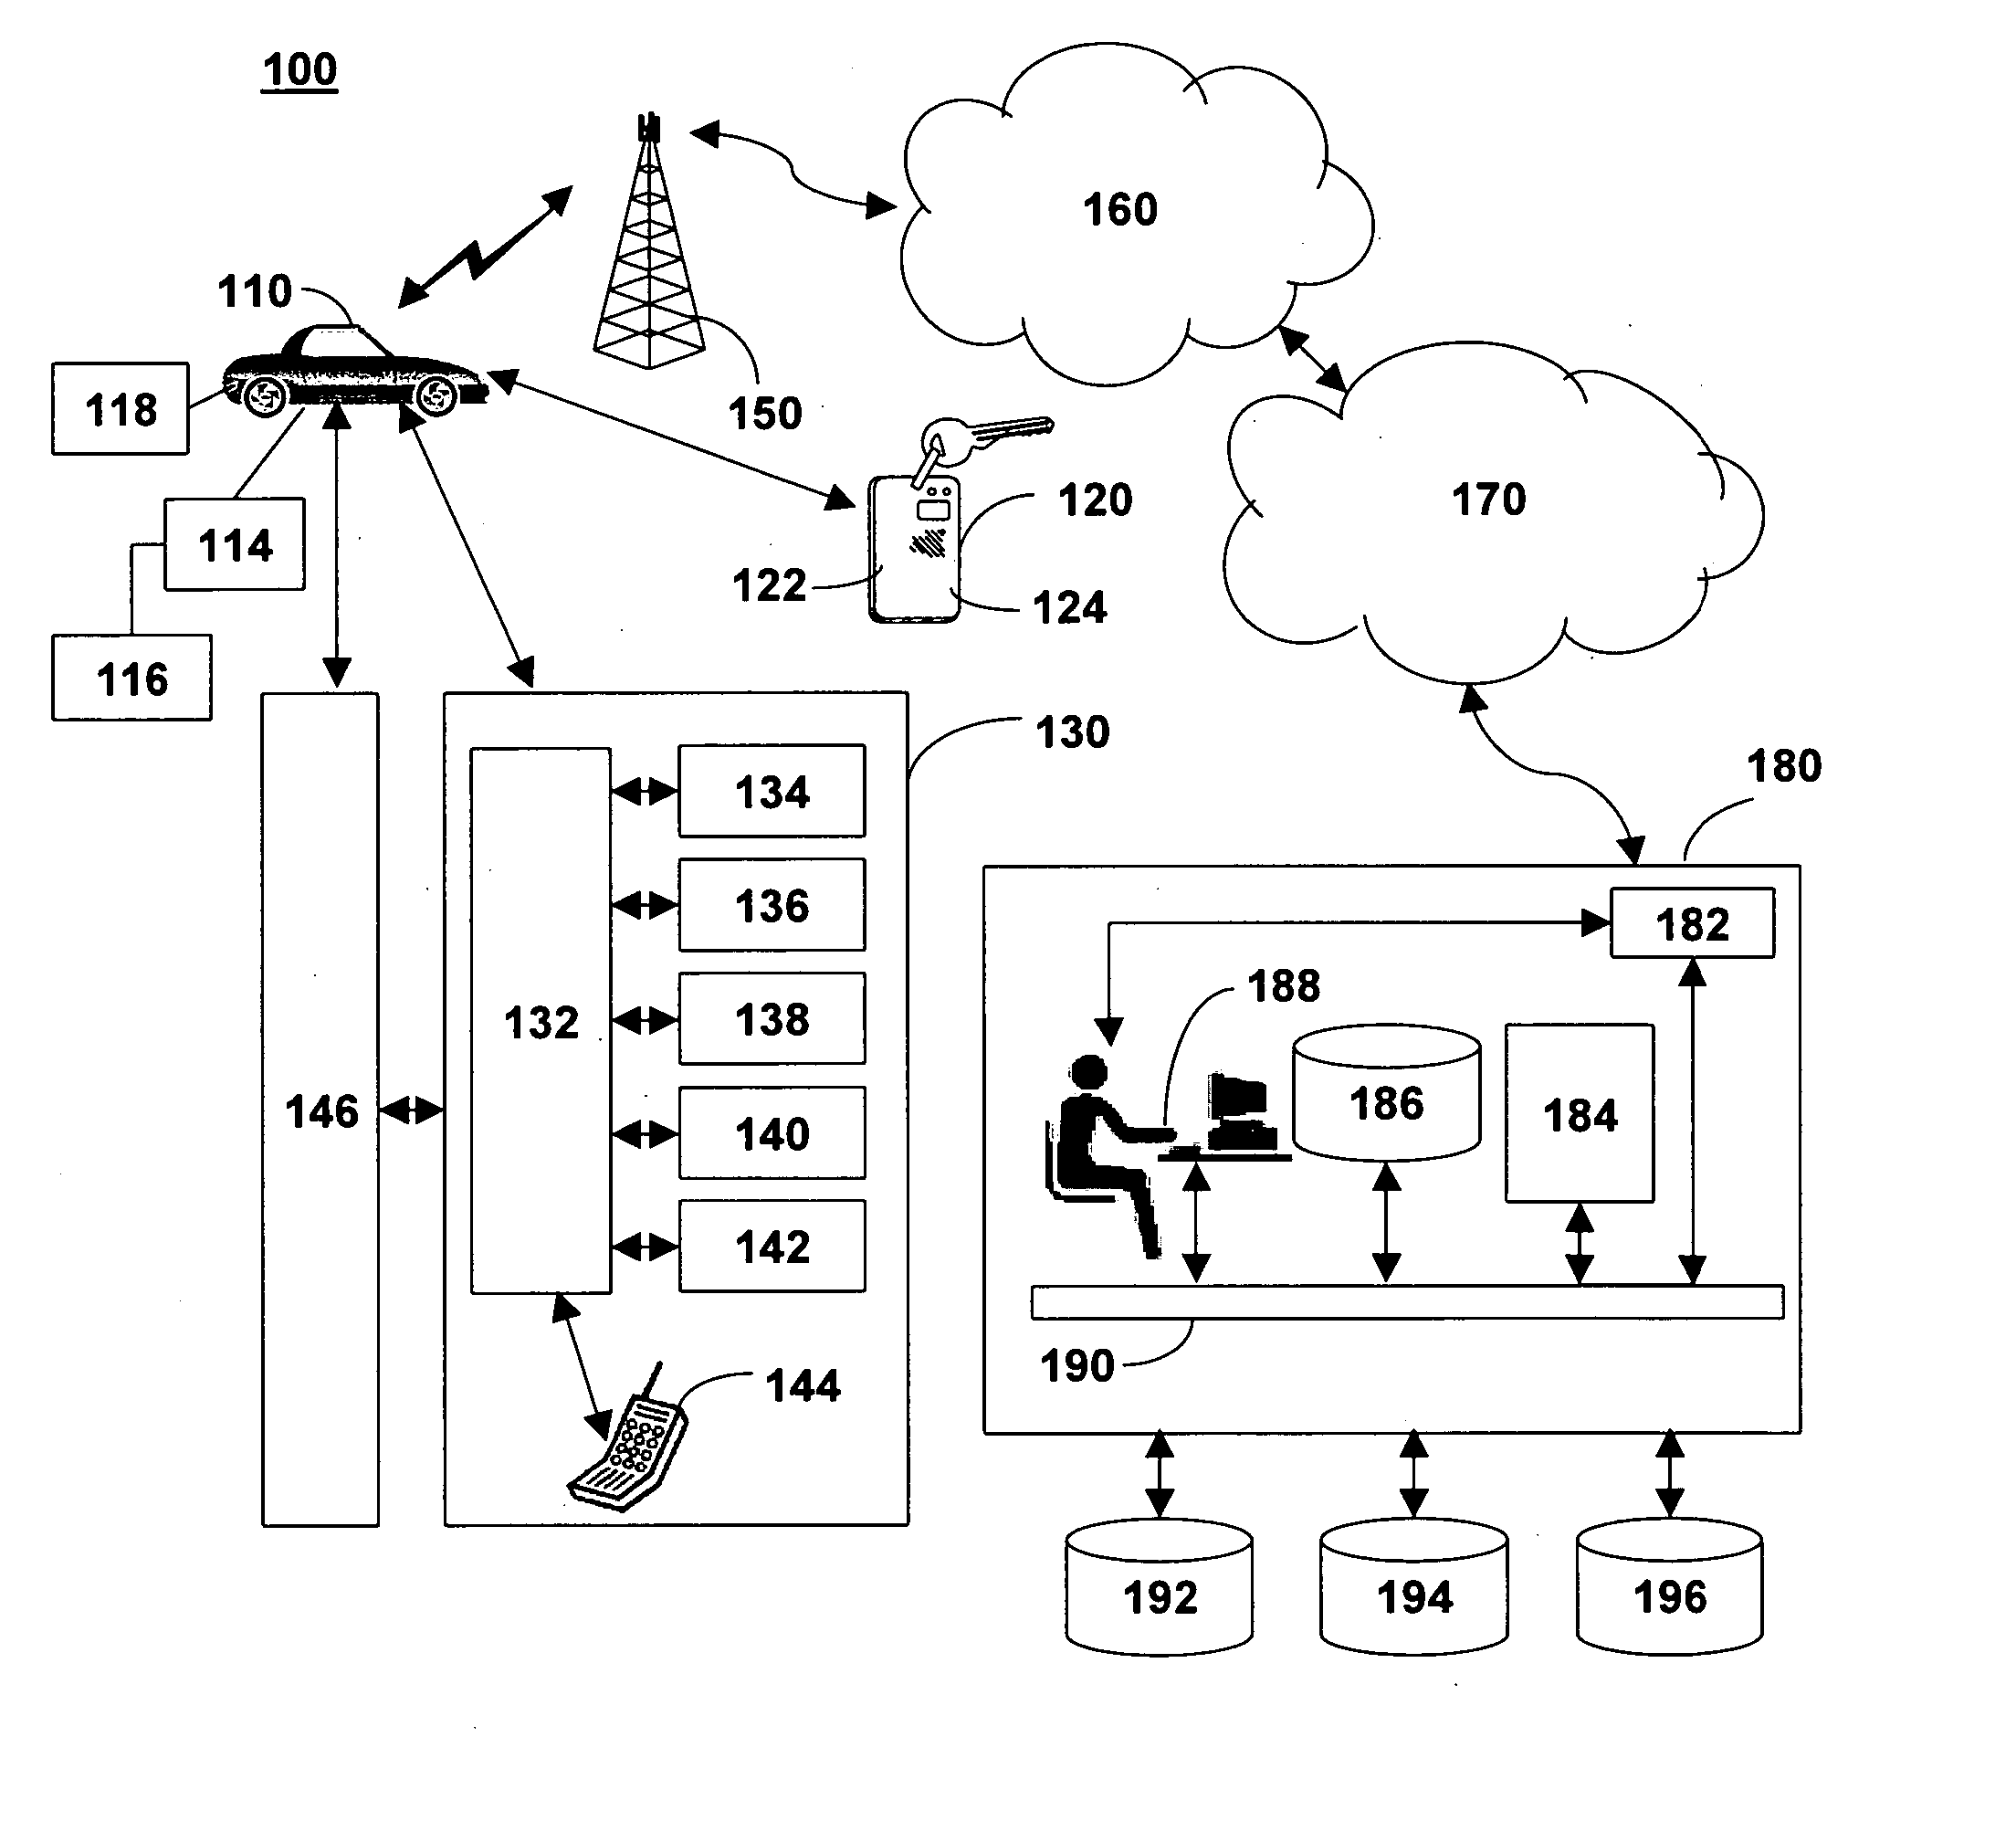 System and method for maintaining and providing personal information in real time